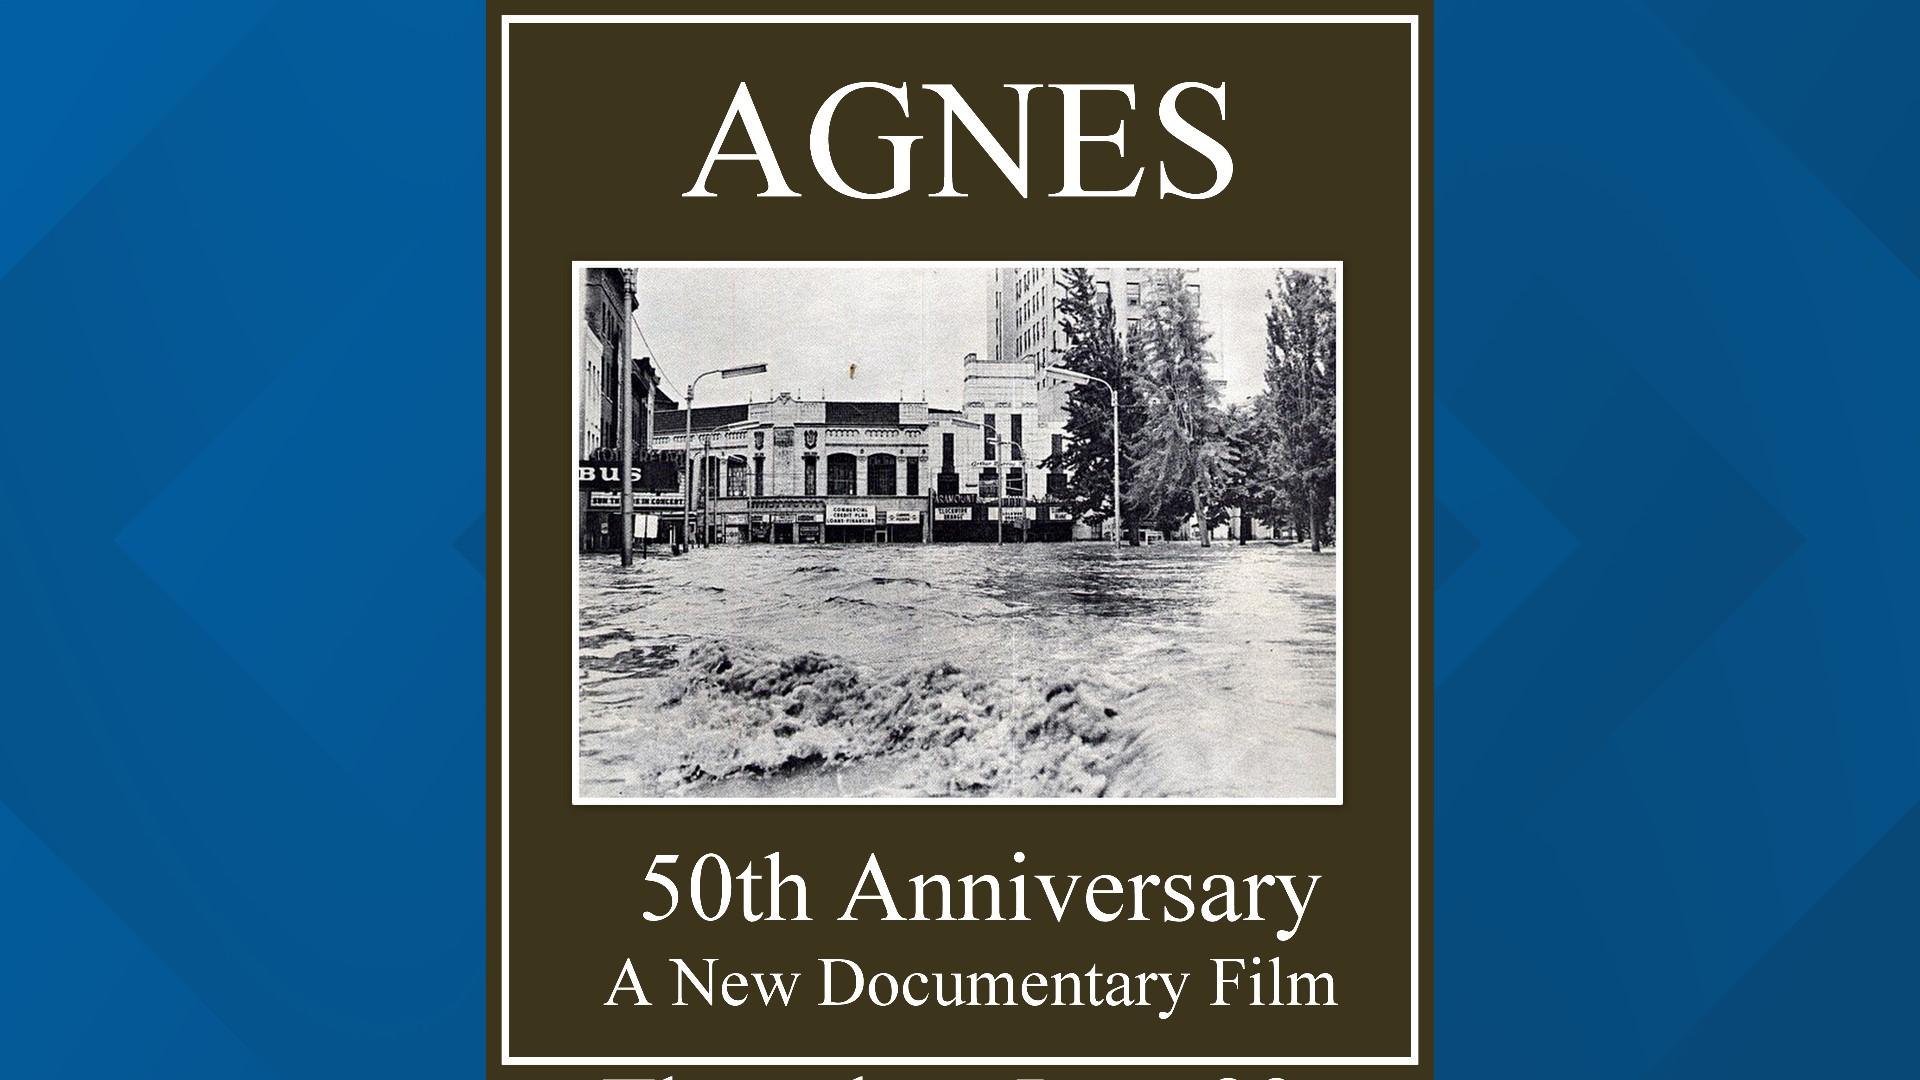 A film about the preparation, destruction, and recovery surrounding Agnes in 1972 will premiere at the F.M. Kirby Center.